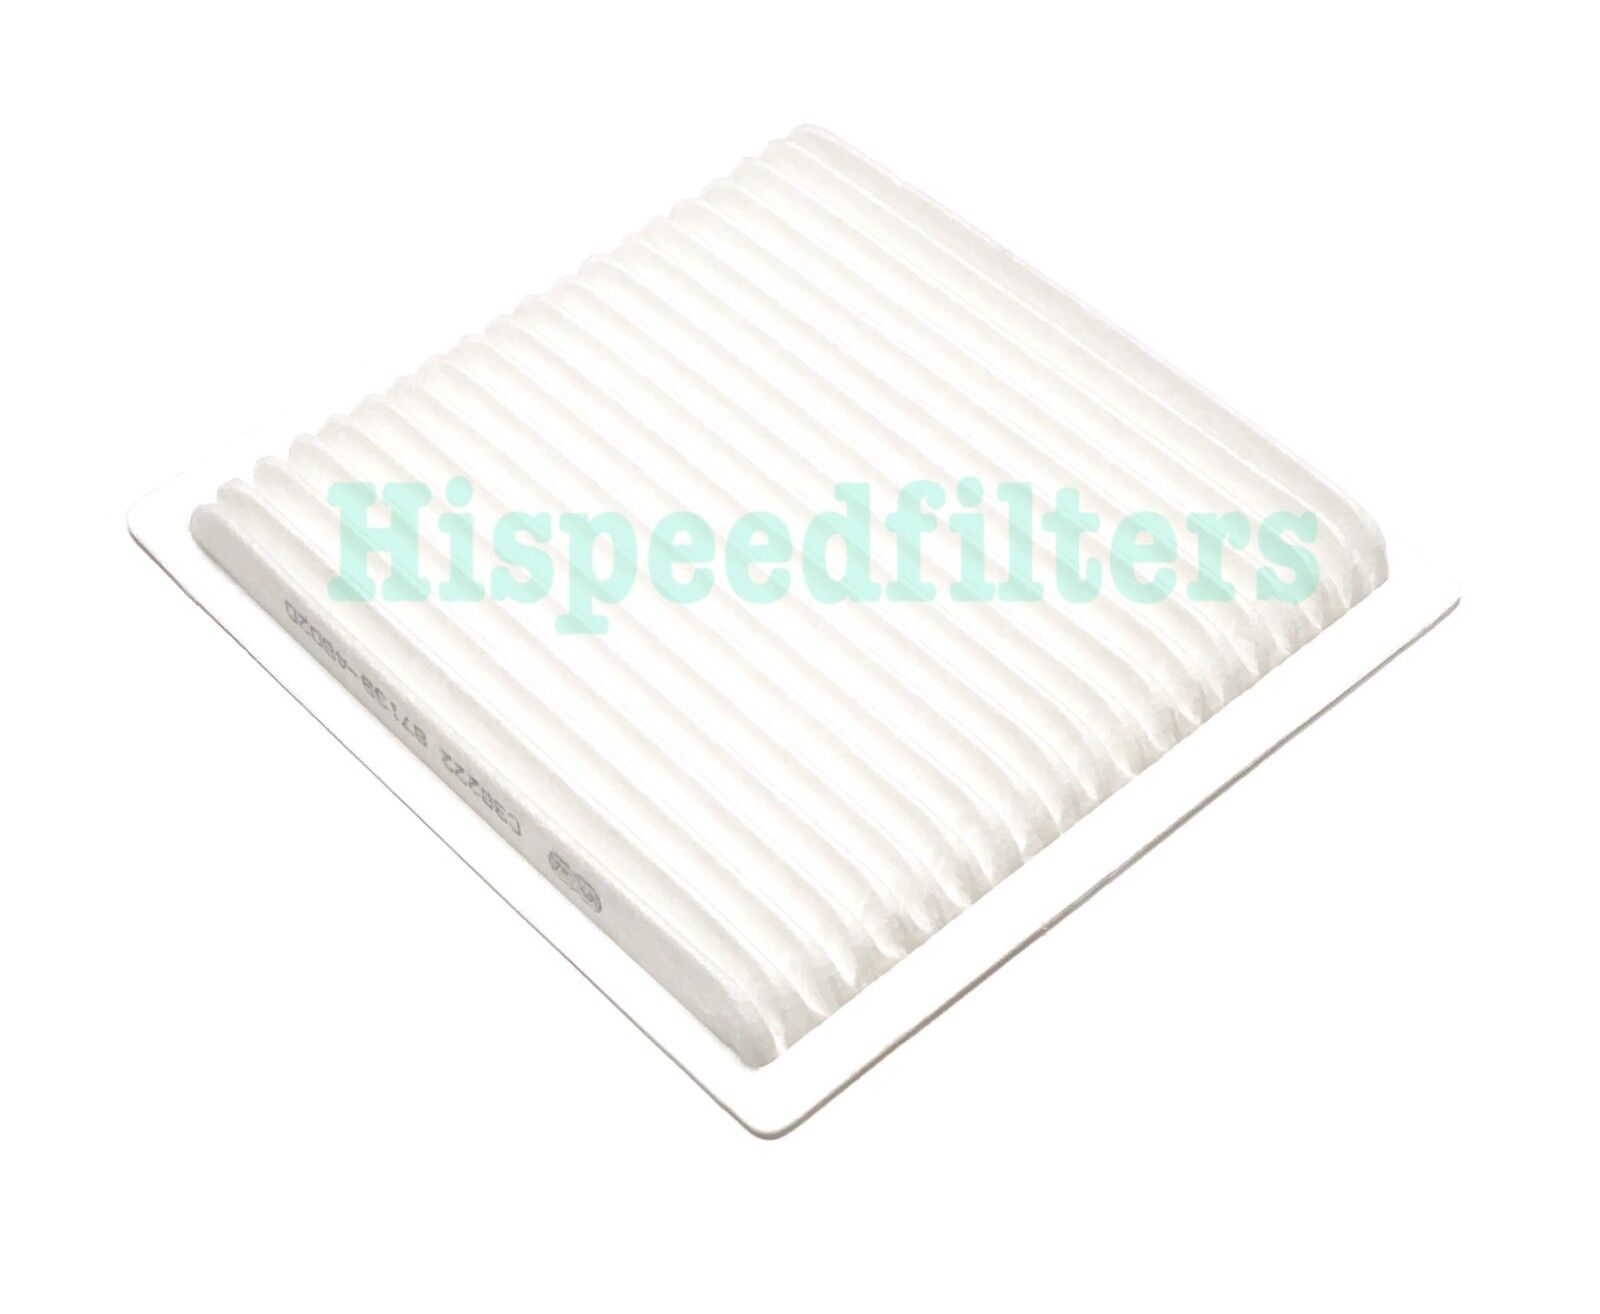 CABIN AIR FILTER For Toyota Highlander 01-07 Lexus IS300 01-05 GS300 98-00 RX300